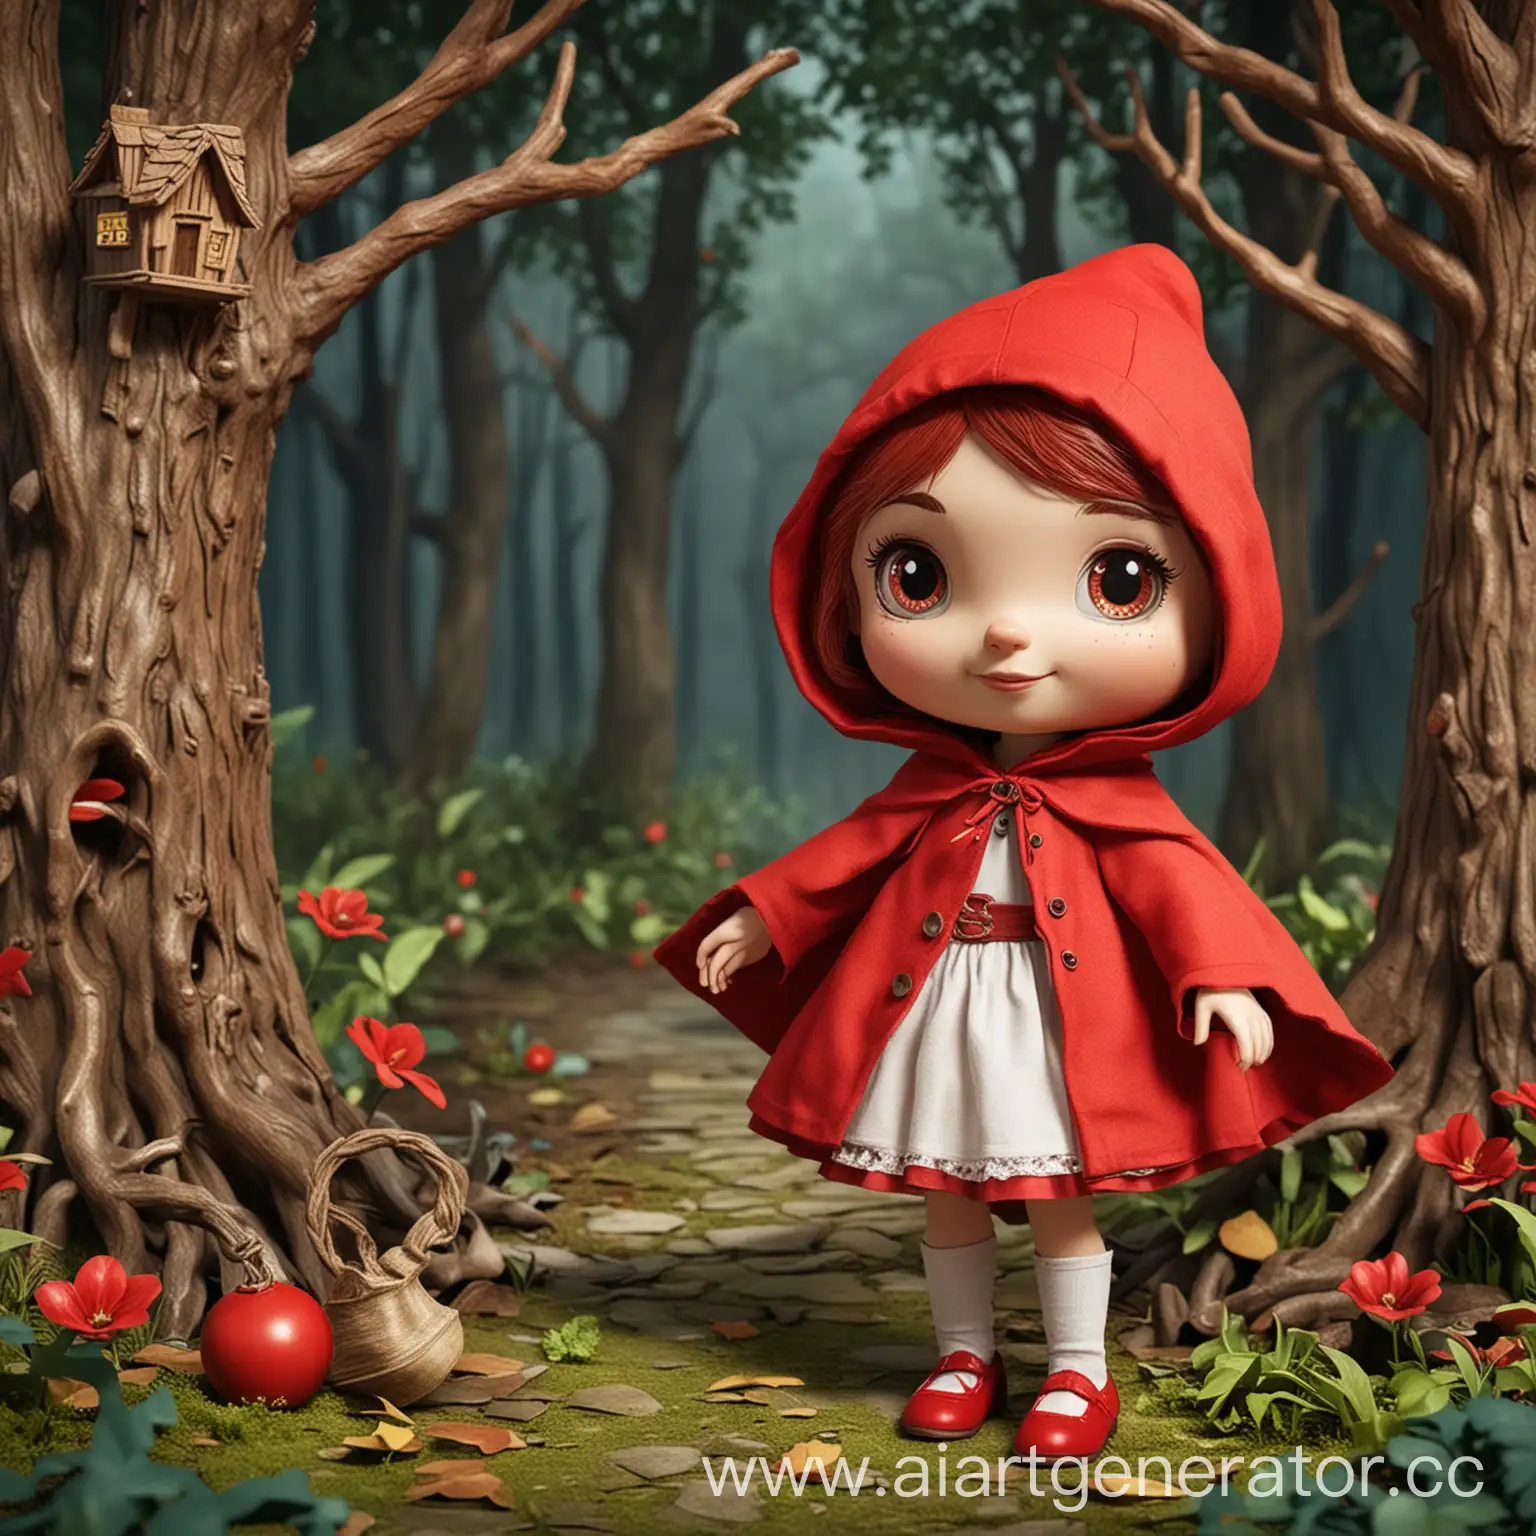 Interactive-Little-Red-Riding-Hood-Adventure-Game